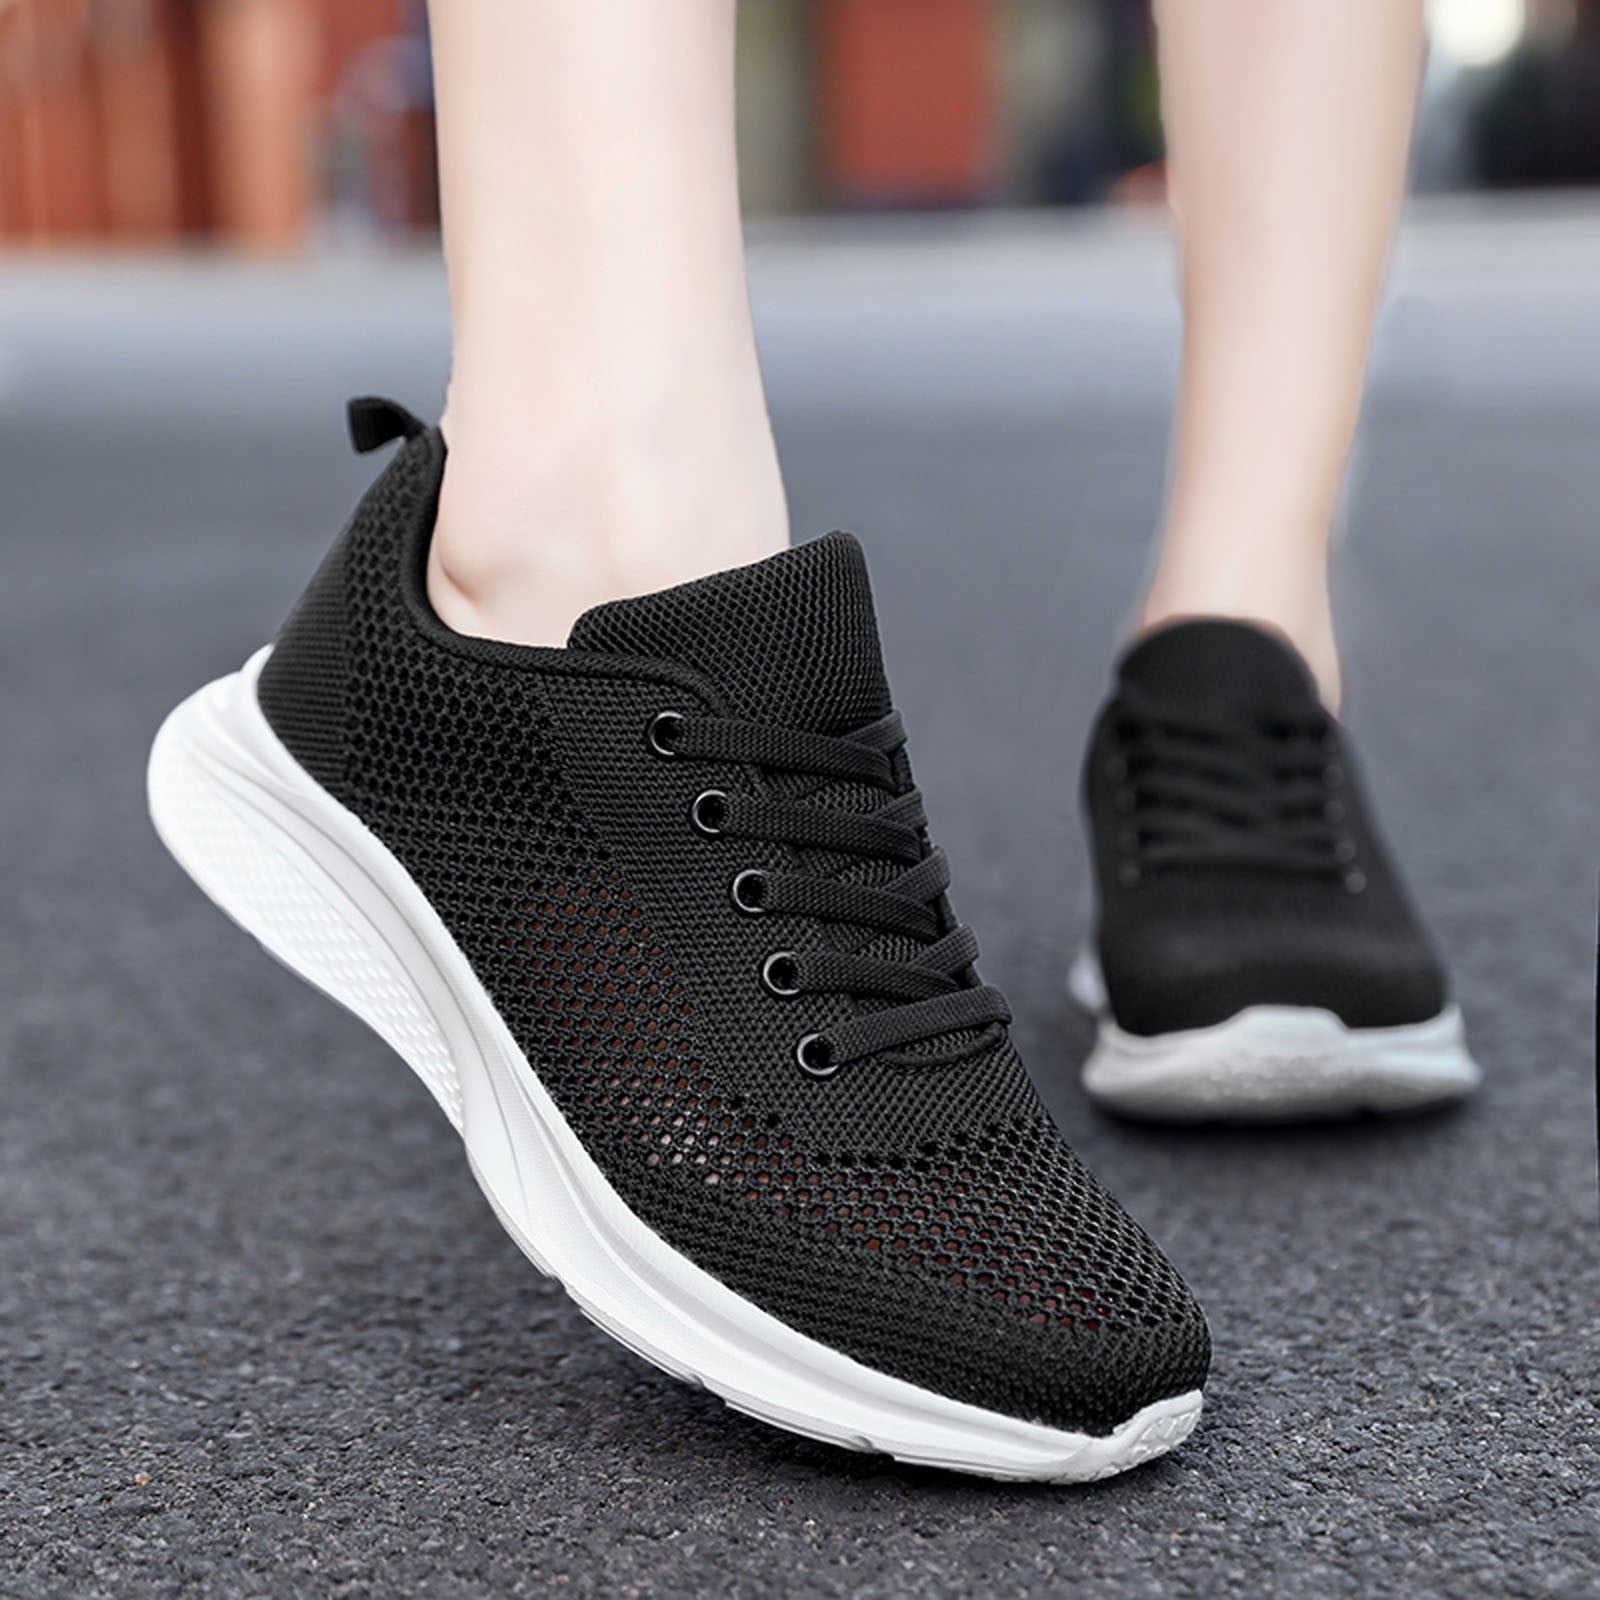 CAICJ98 Womens Running Shoes Women's Slip on Flat Shoes Comfortable Knit  Loafers Lightweight Nurse Walking Sneakers,Black